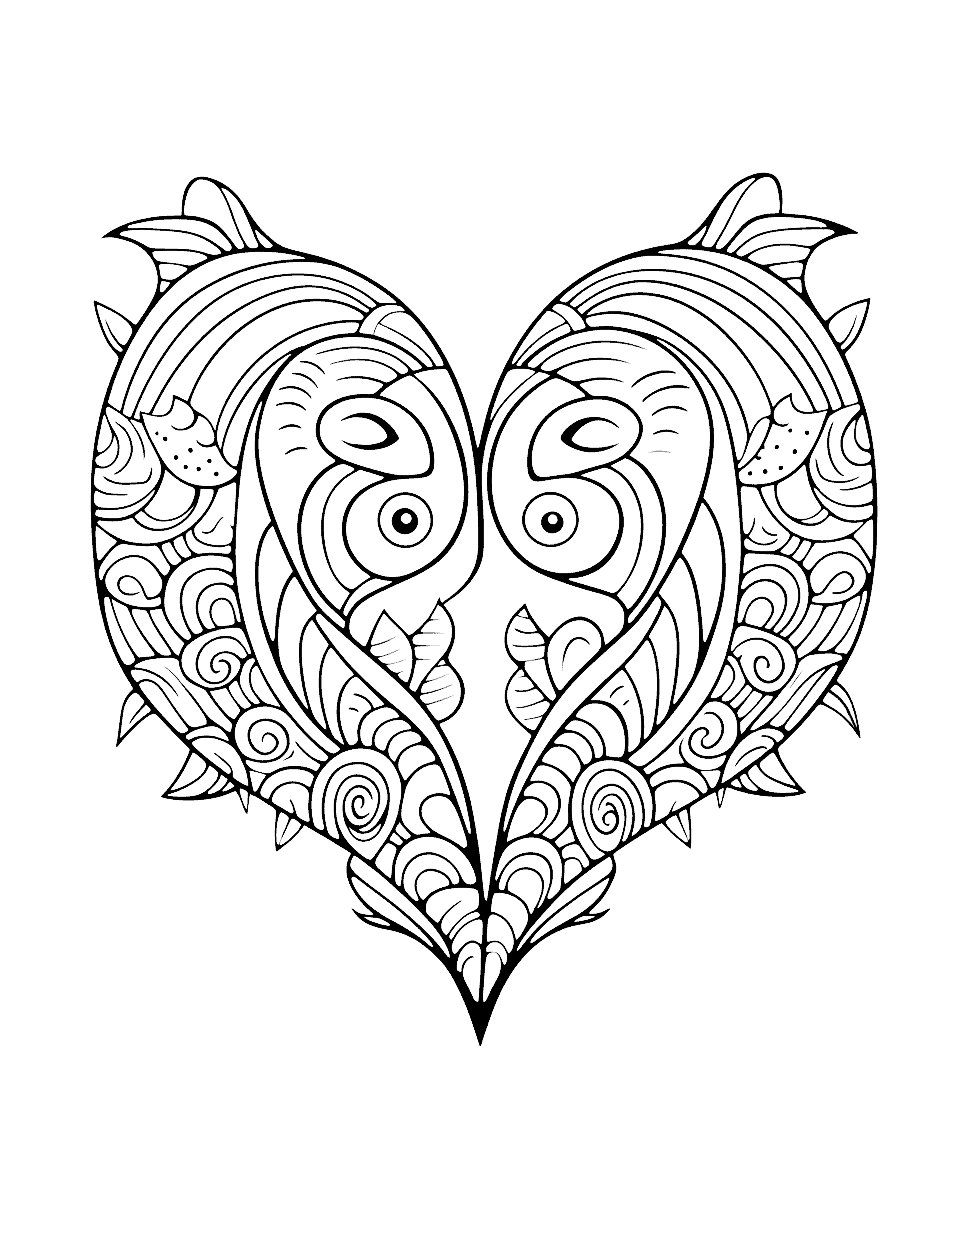 Fish Love Heart Coloring Page - Two fish forming a heart with their tails.